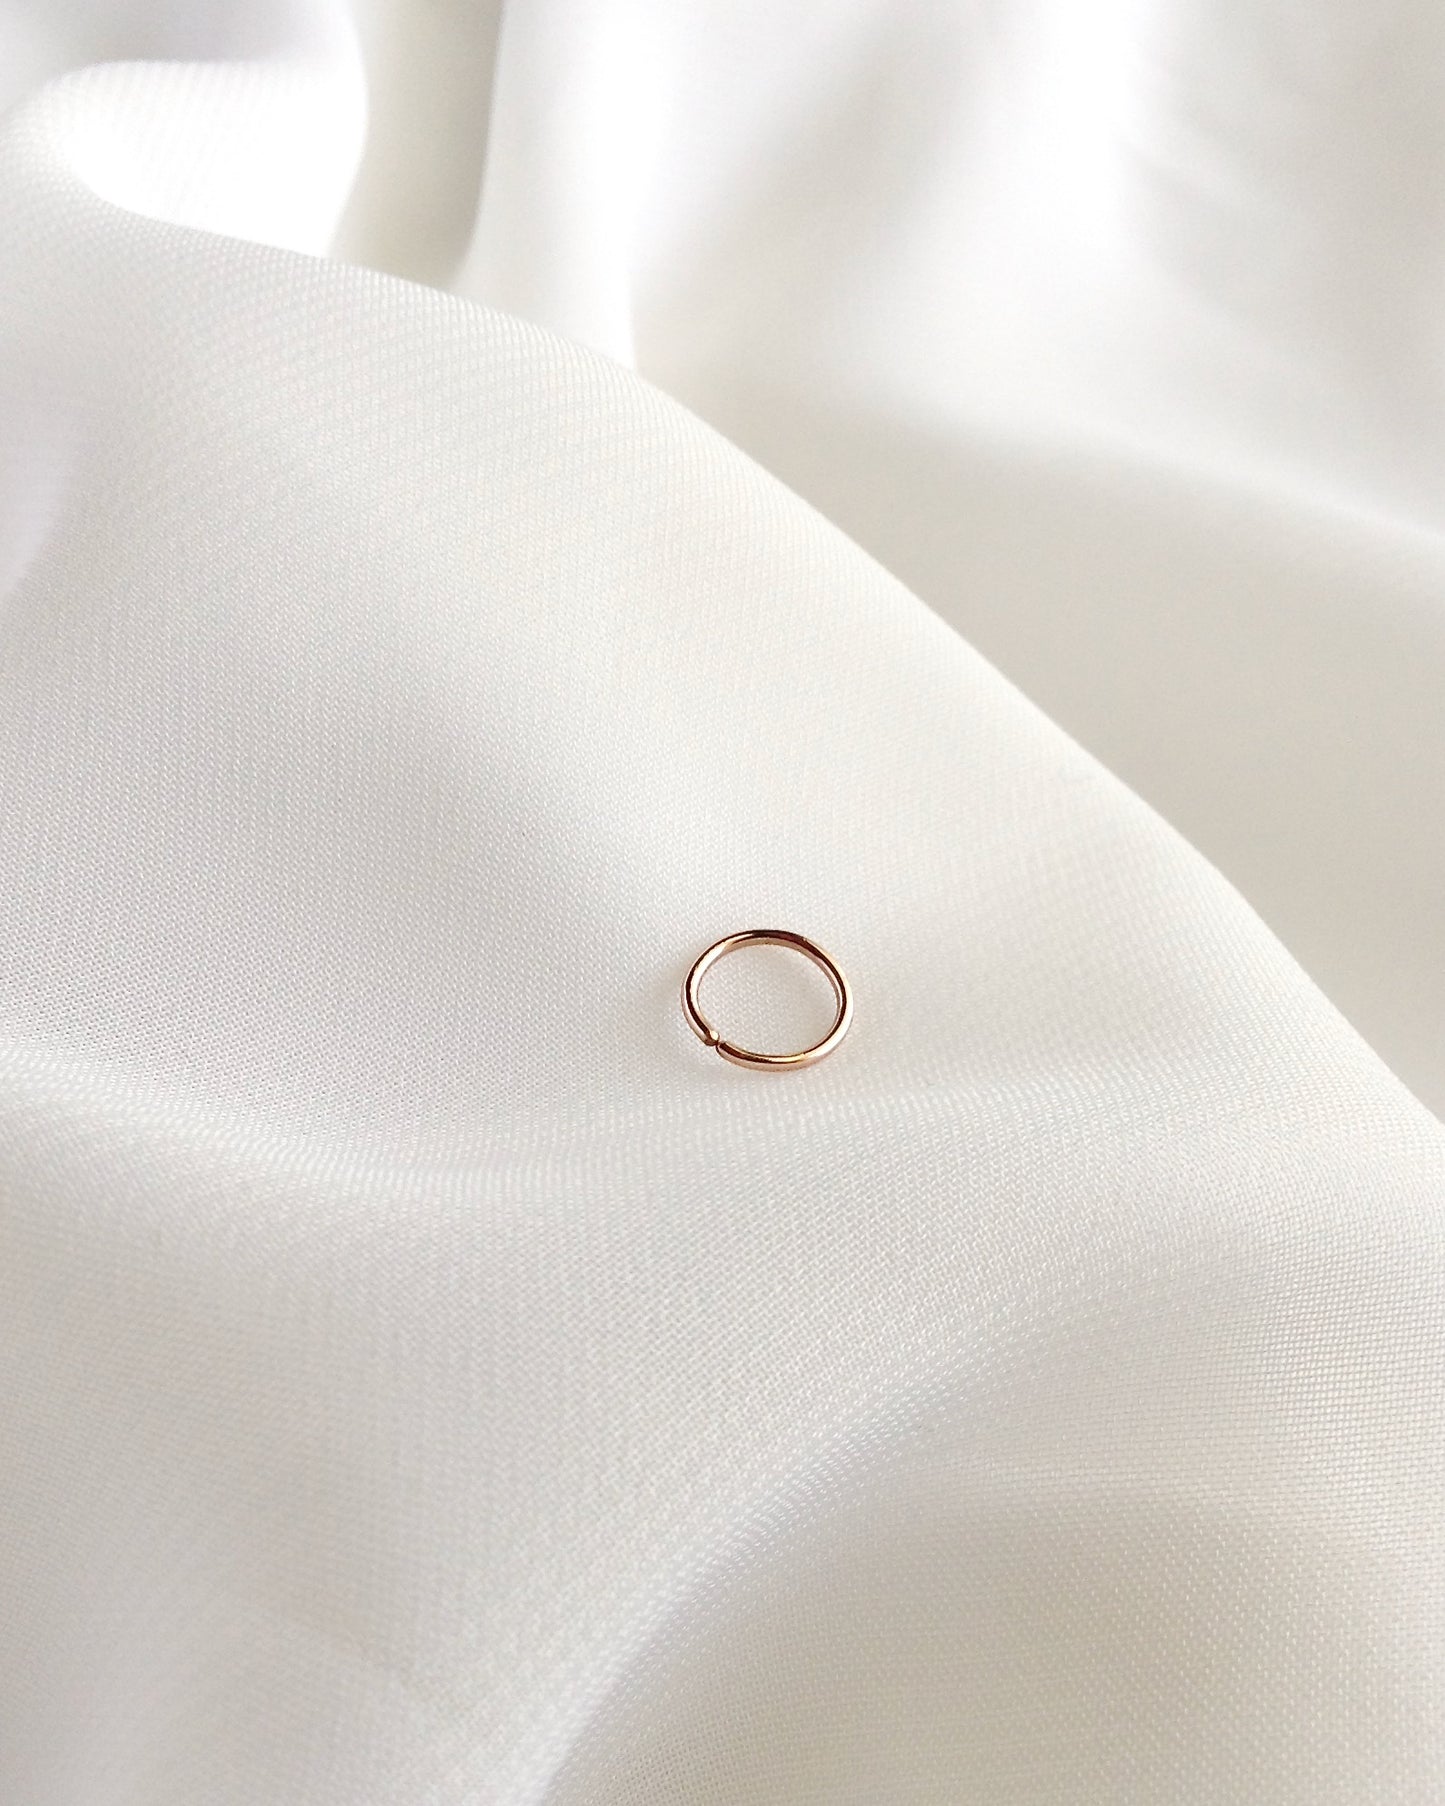 Dainty Cartilage Hoop | Rose Gold Filled Cartilage Piercing Hoop | Rose Gold Filled Helix Hoop Earring | IB Jewelry